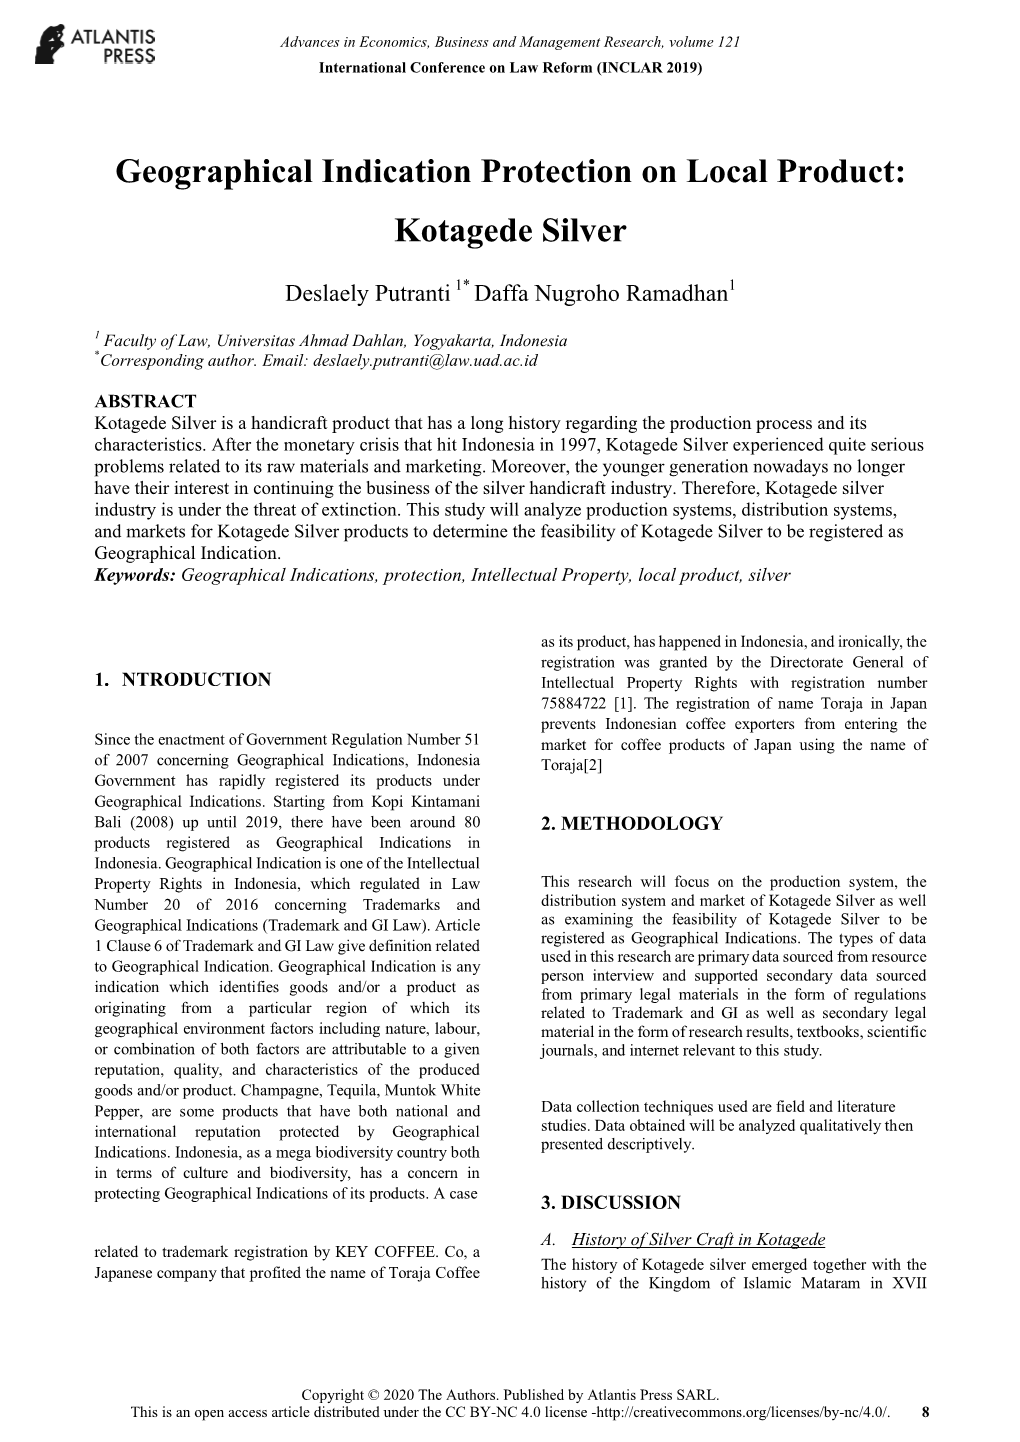 Geographical Indication Protection on Local Product: Kotagede Silver